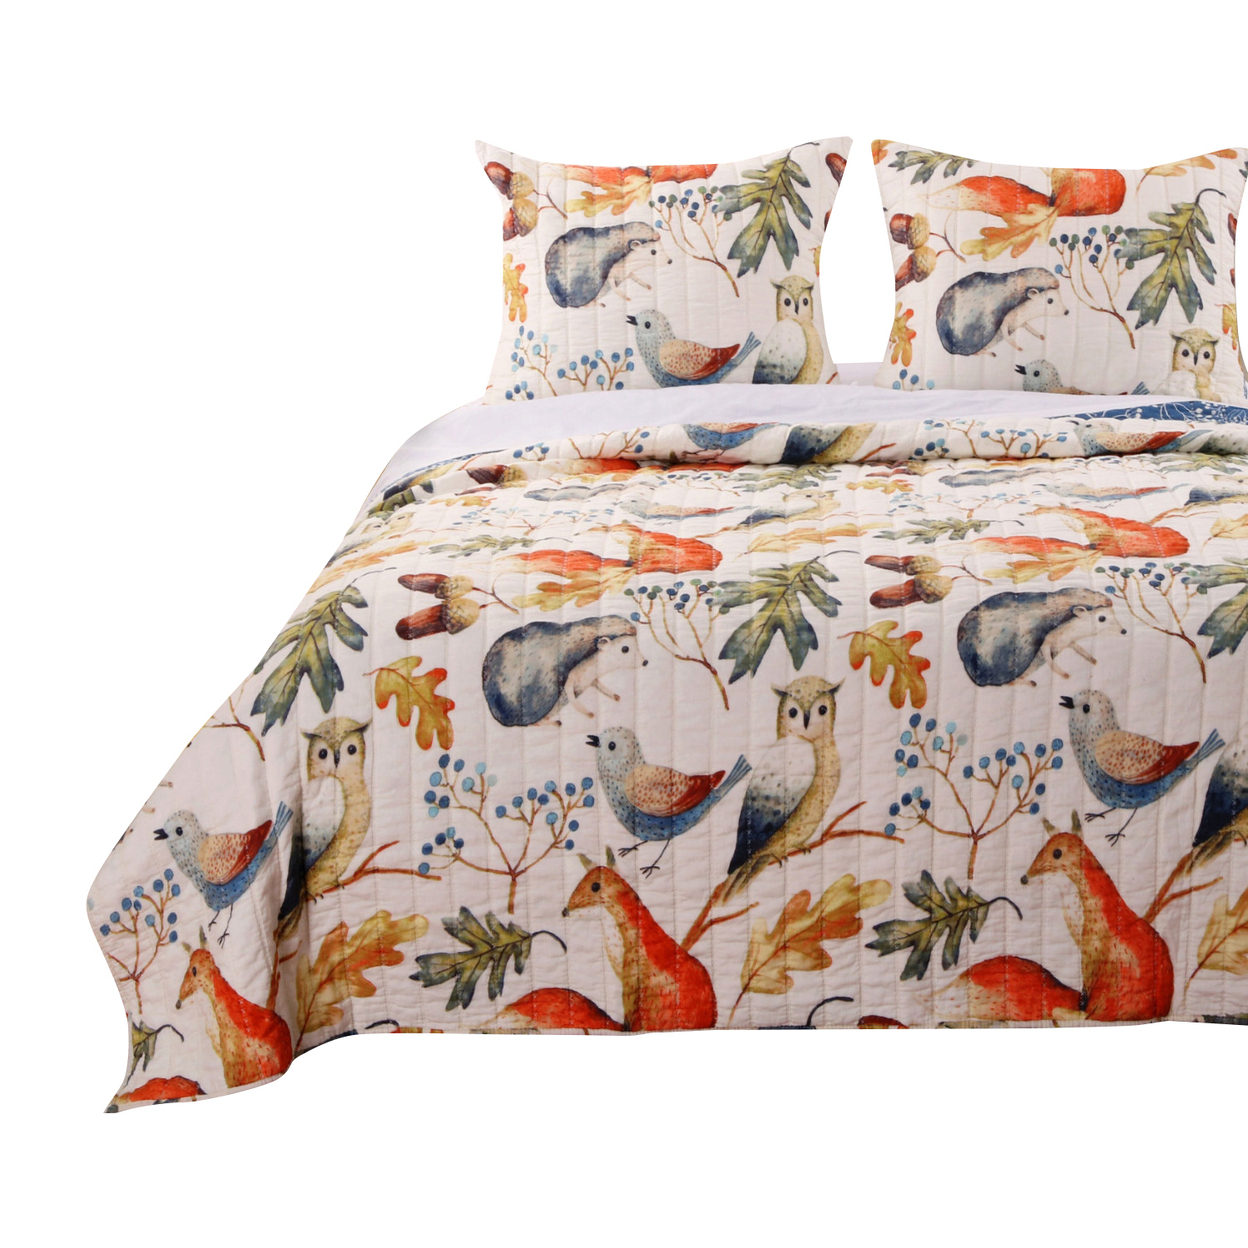 Nature Inspired Full And Queen Size Cotton And Polyester Quilt Set, Multicolor, Set Of Three- Saltoro Sherpi